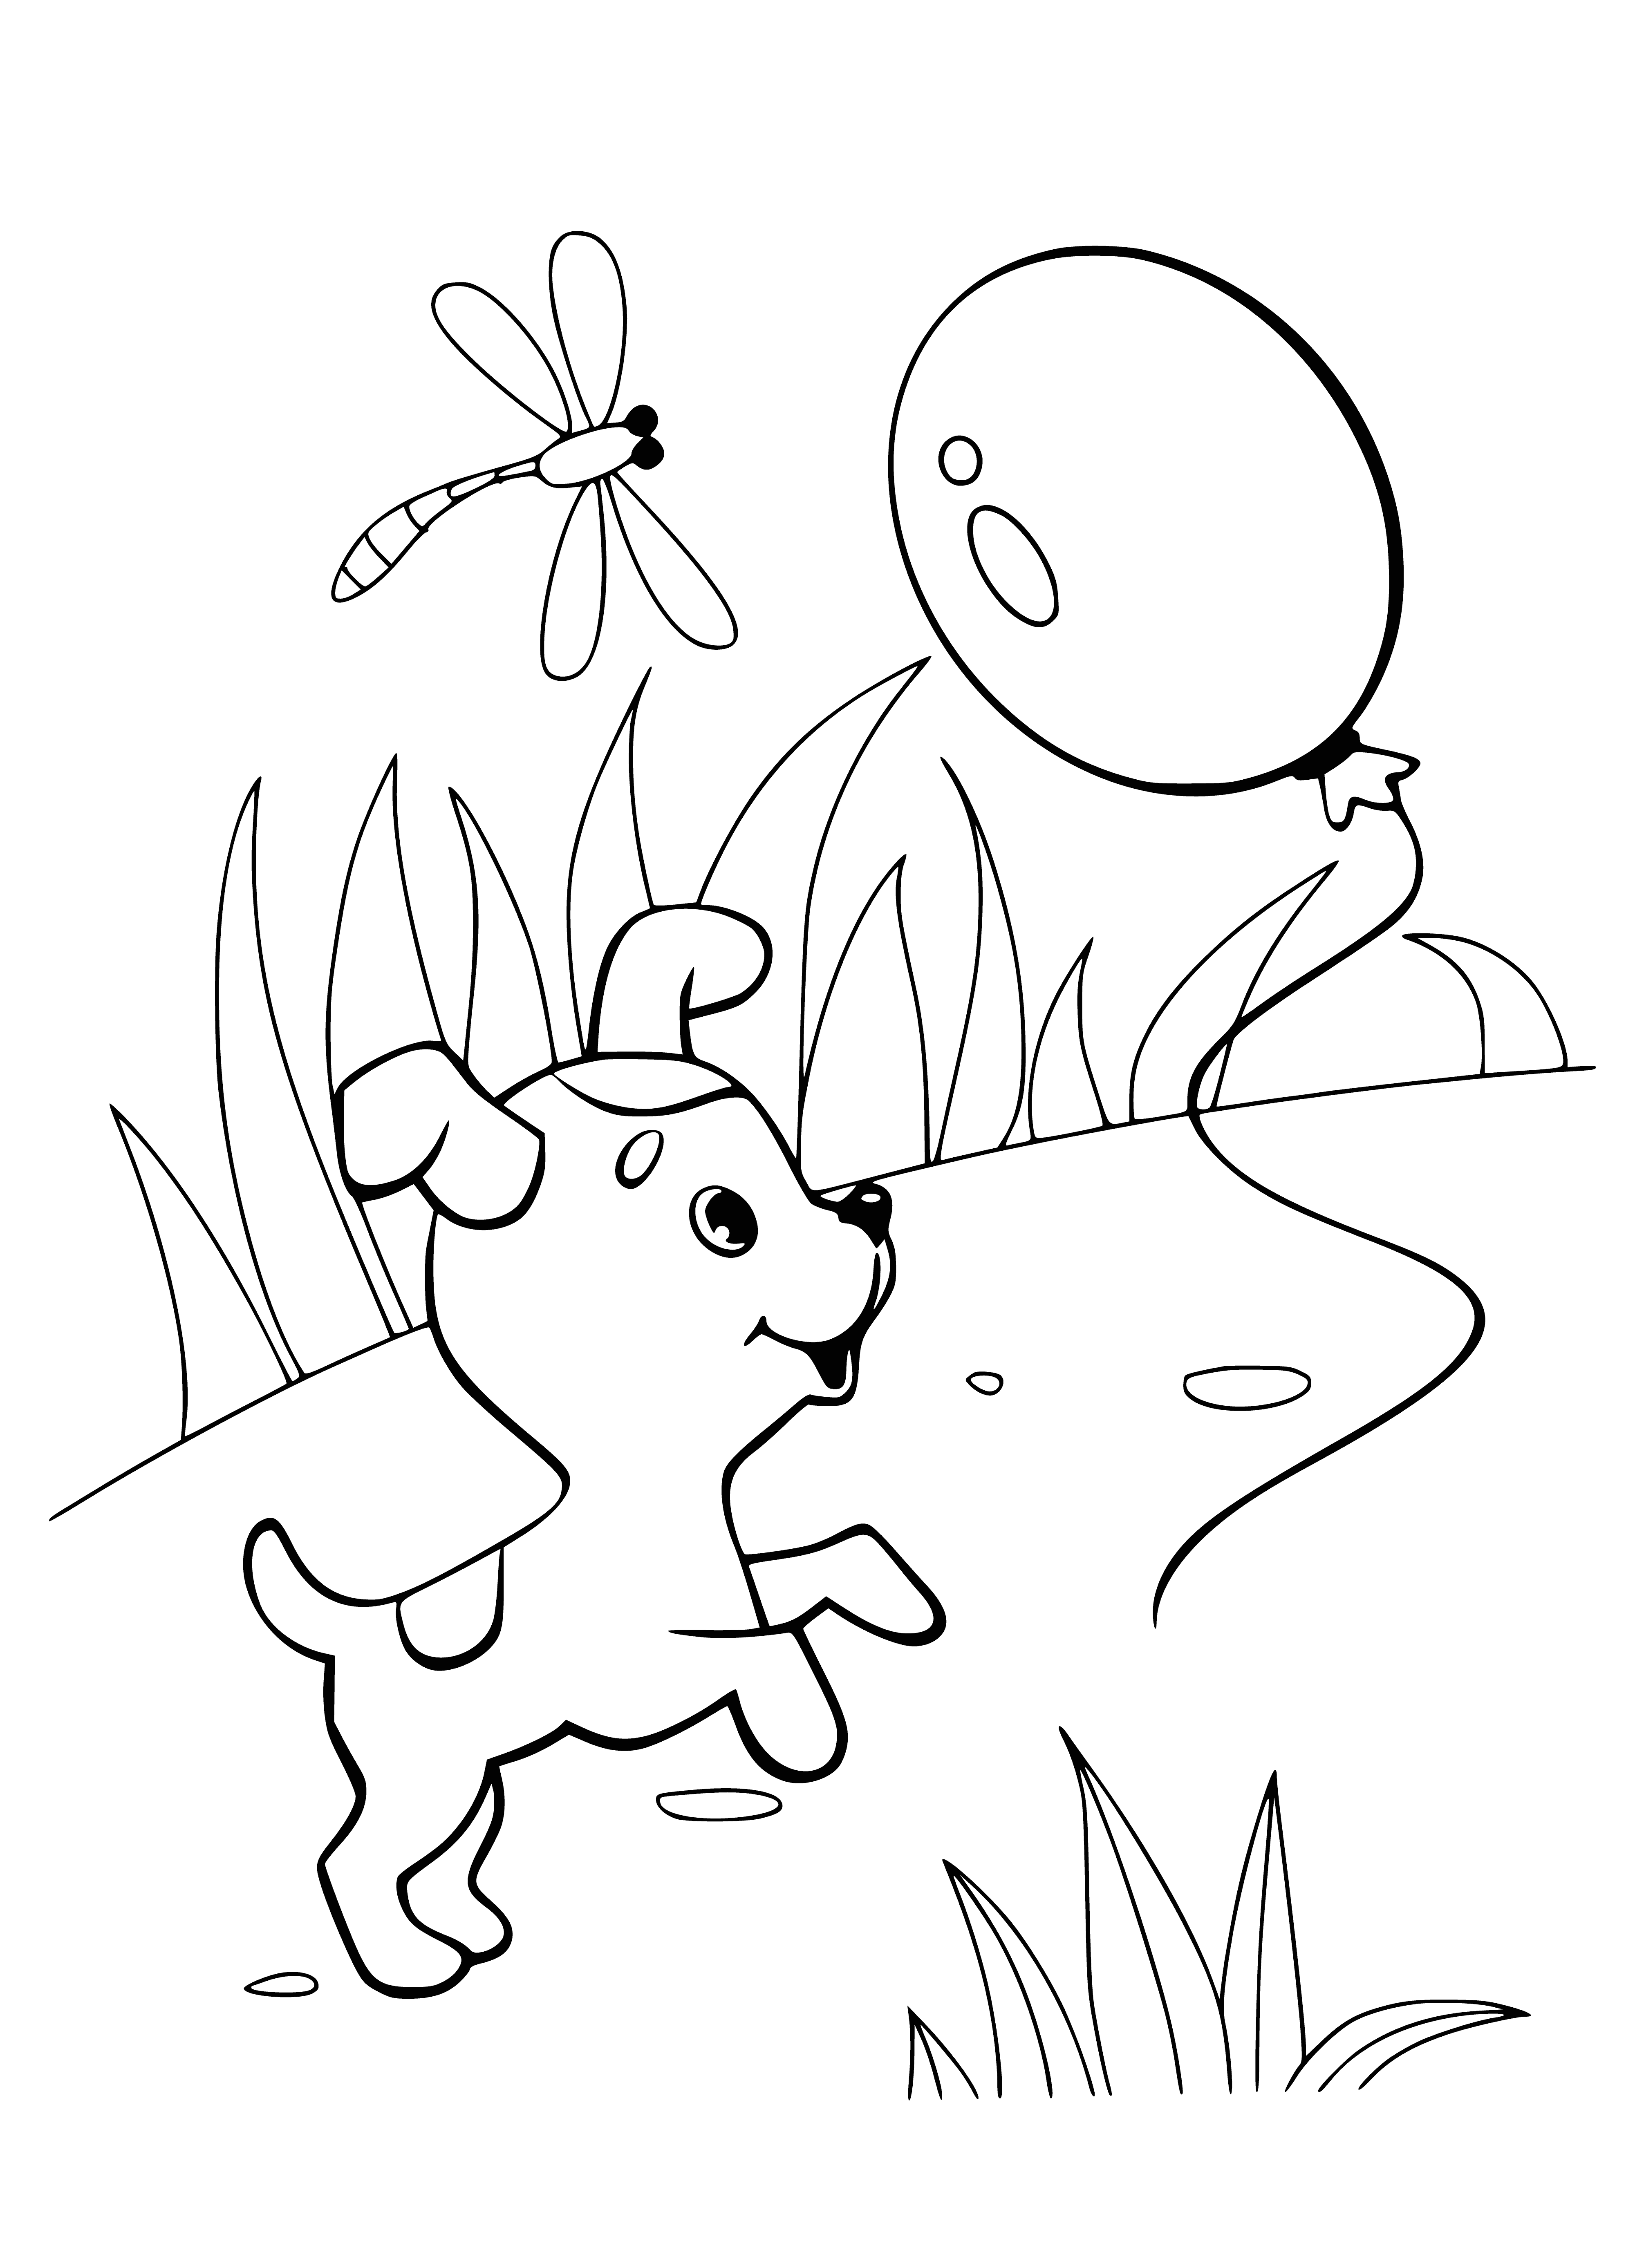 coloring page: Kitten chases a ball across the room, leaping and pouncing in an attempt to catch it.